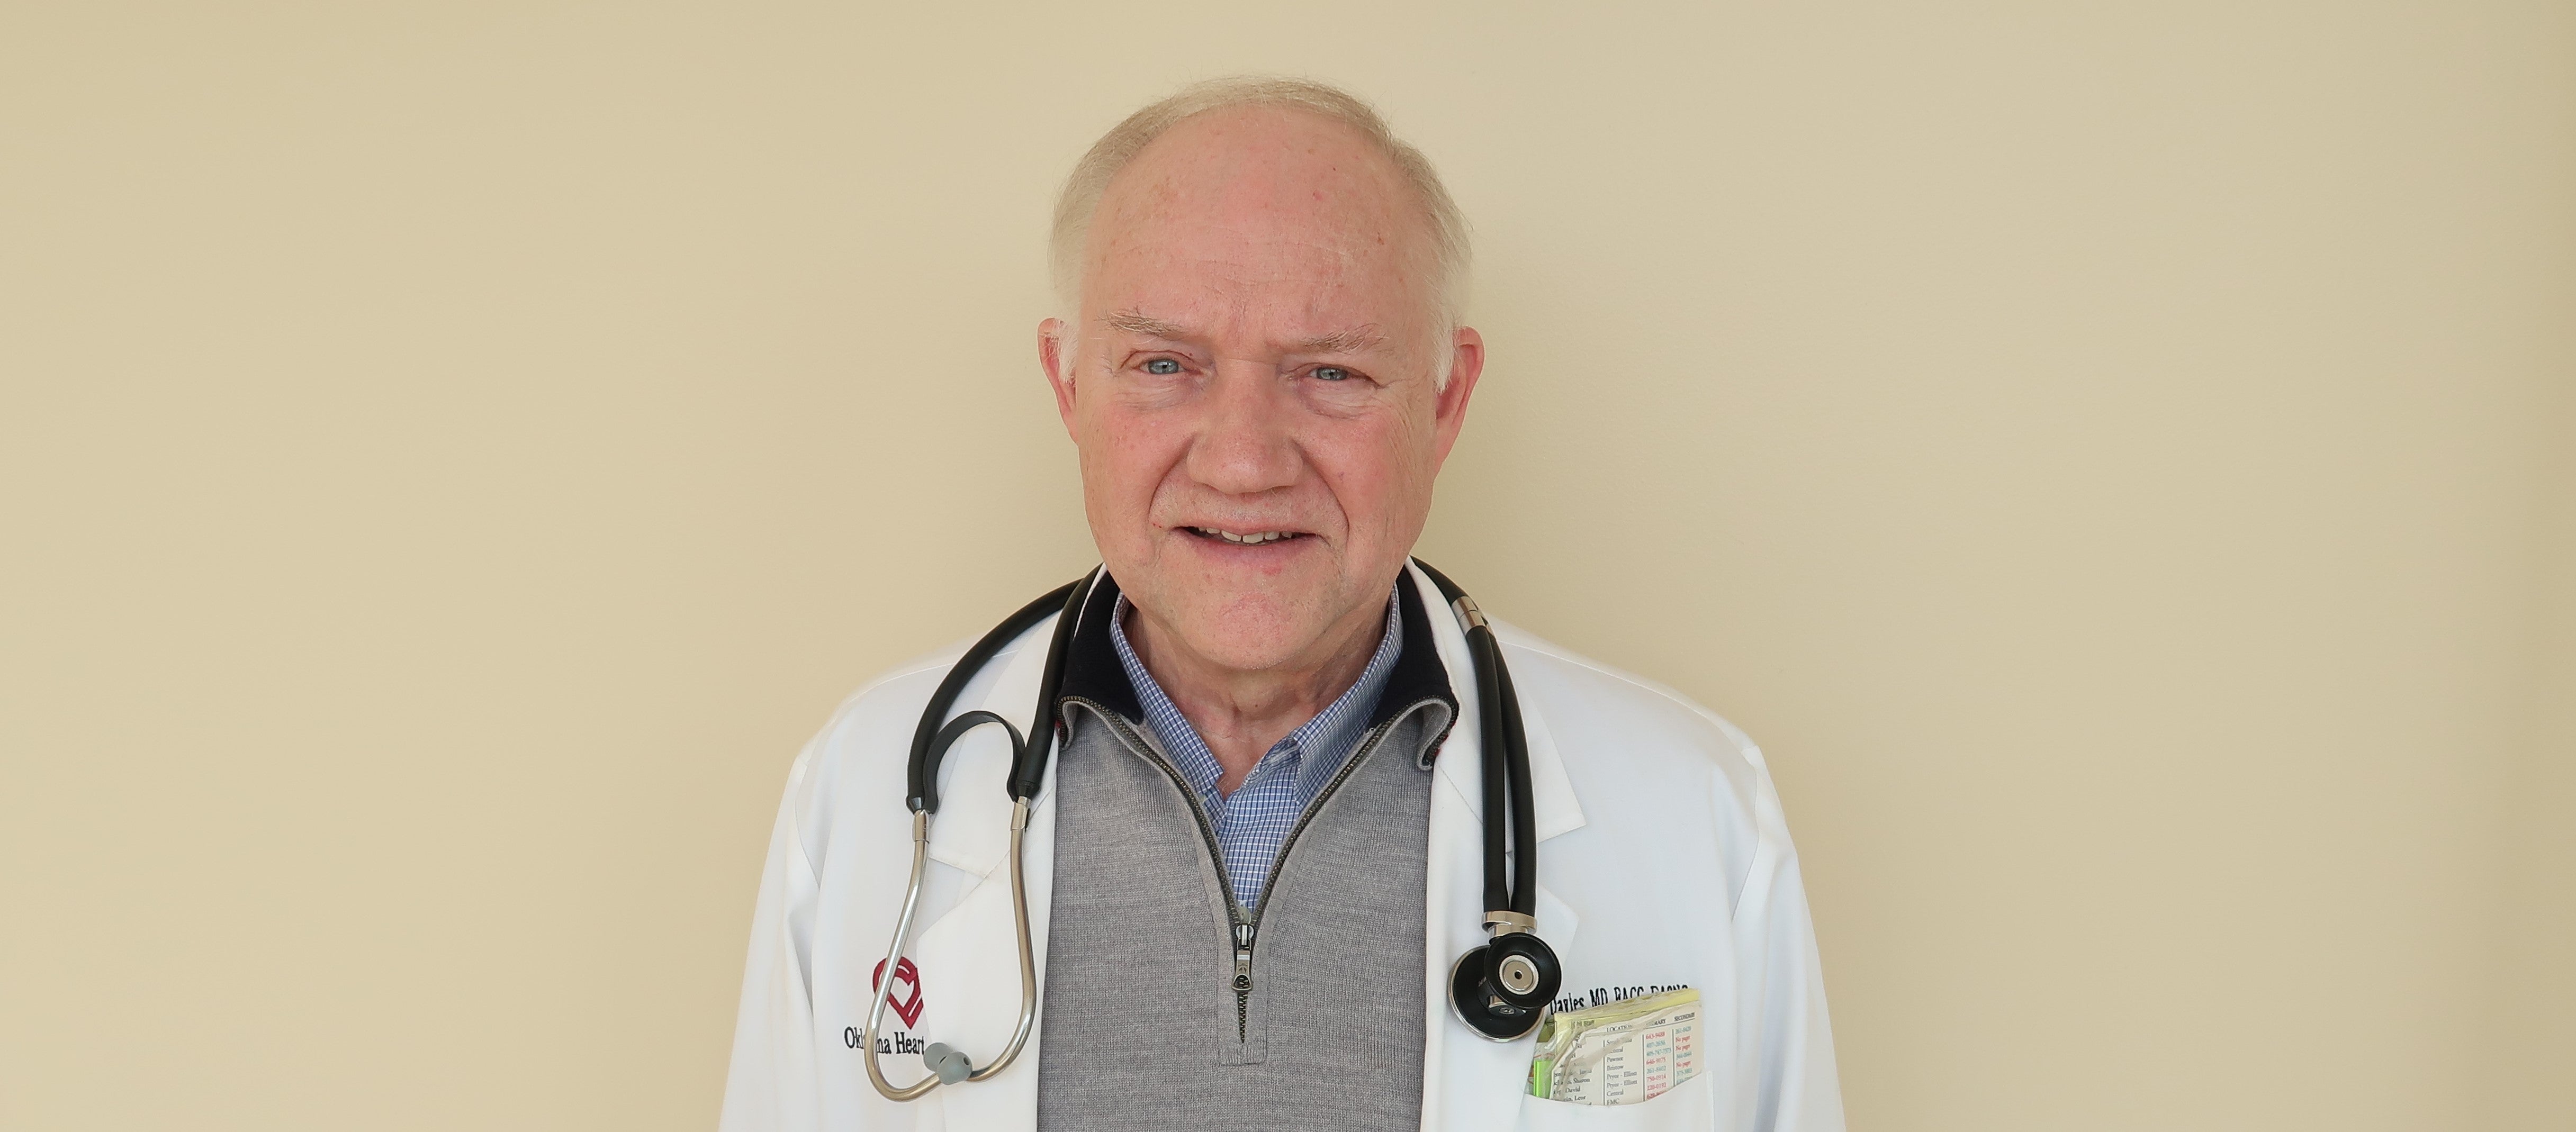 Doctors Day Profile Douglas Davies M D Shares About His Career As